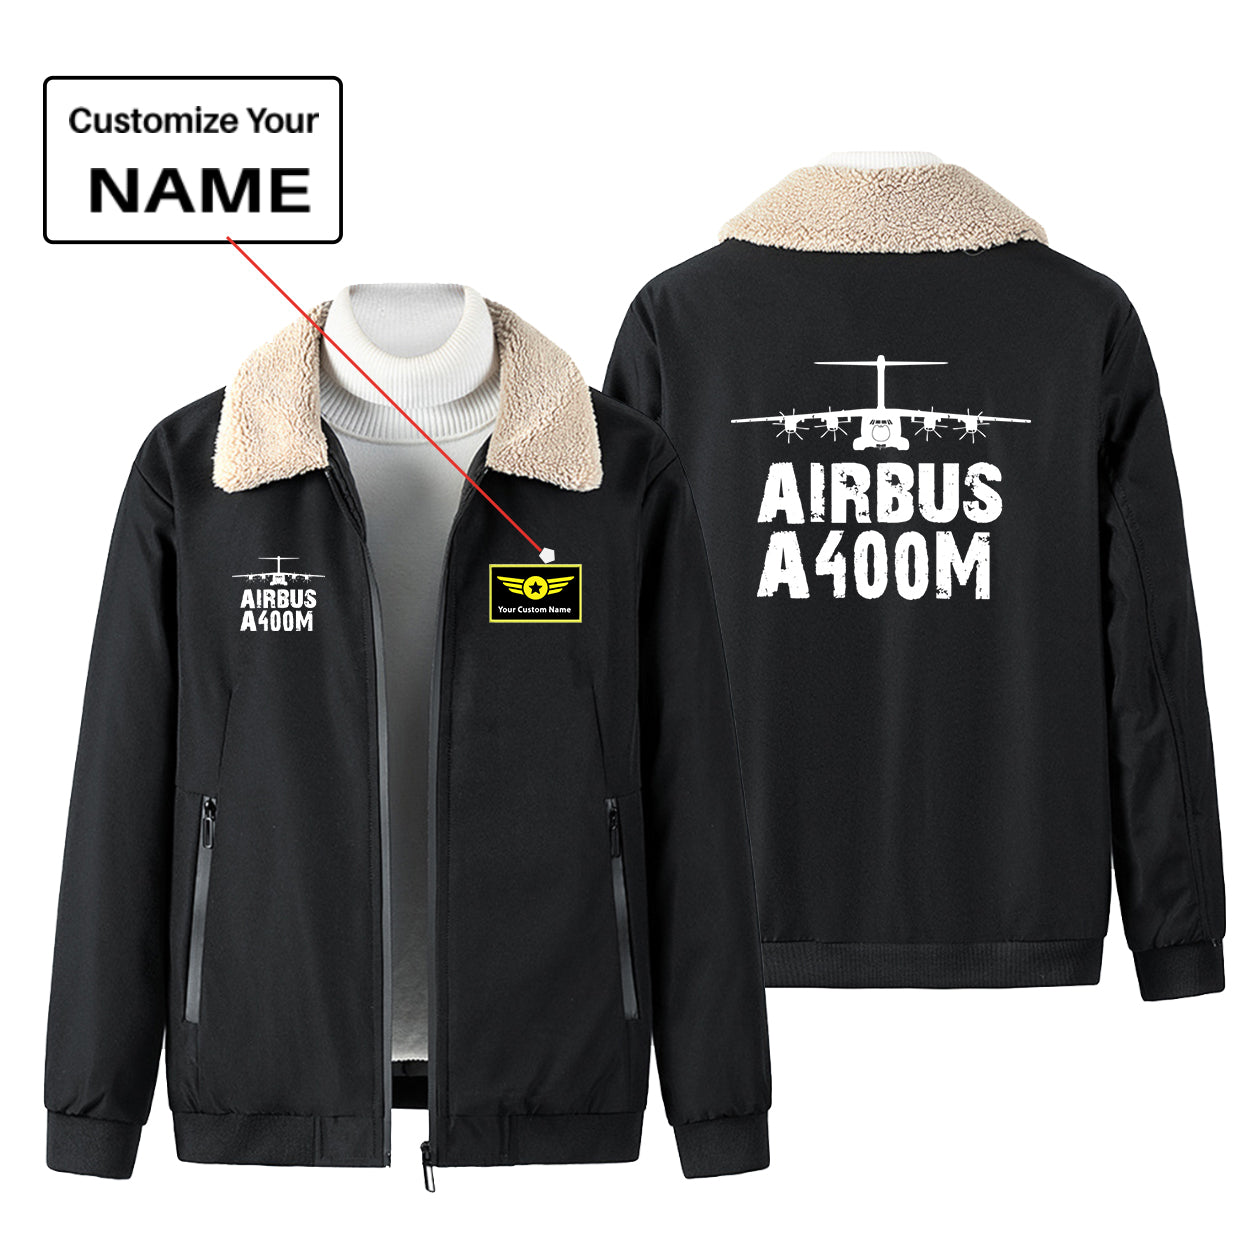 Airbus A400M & Plane Designed Winter Bomber Jackets